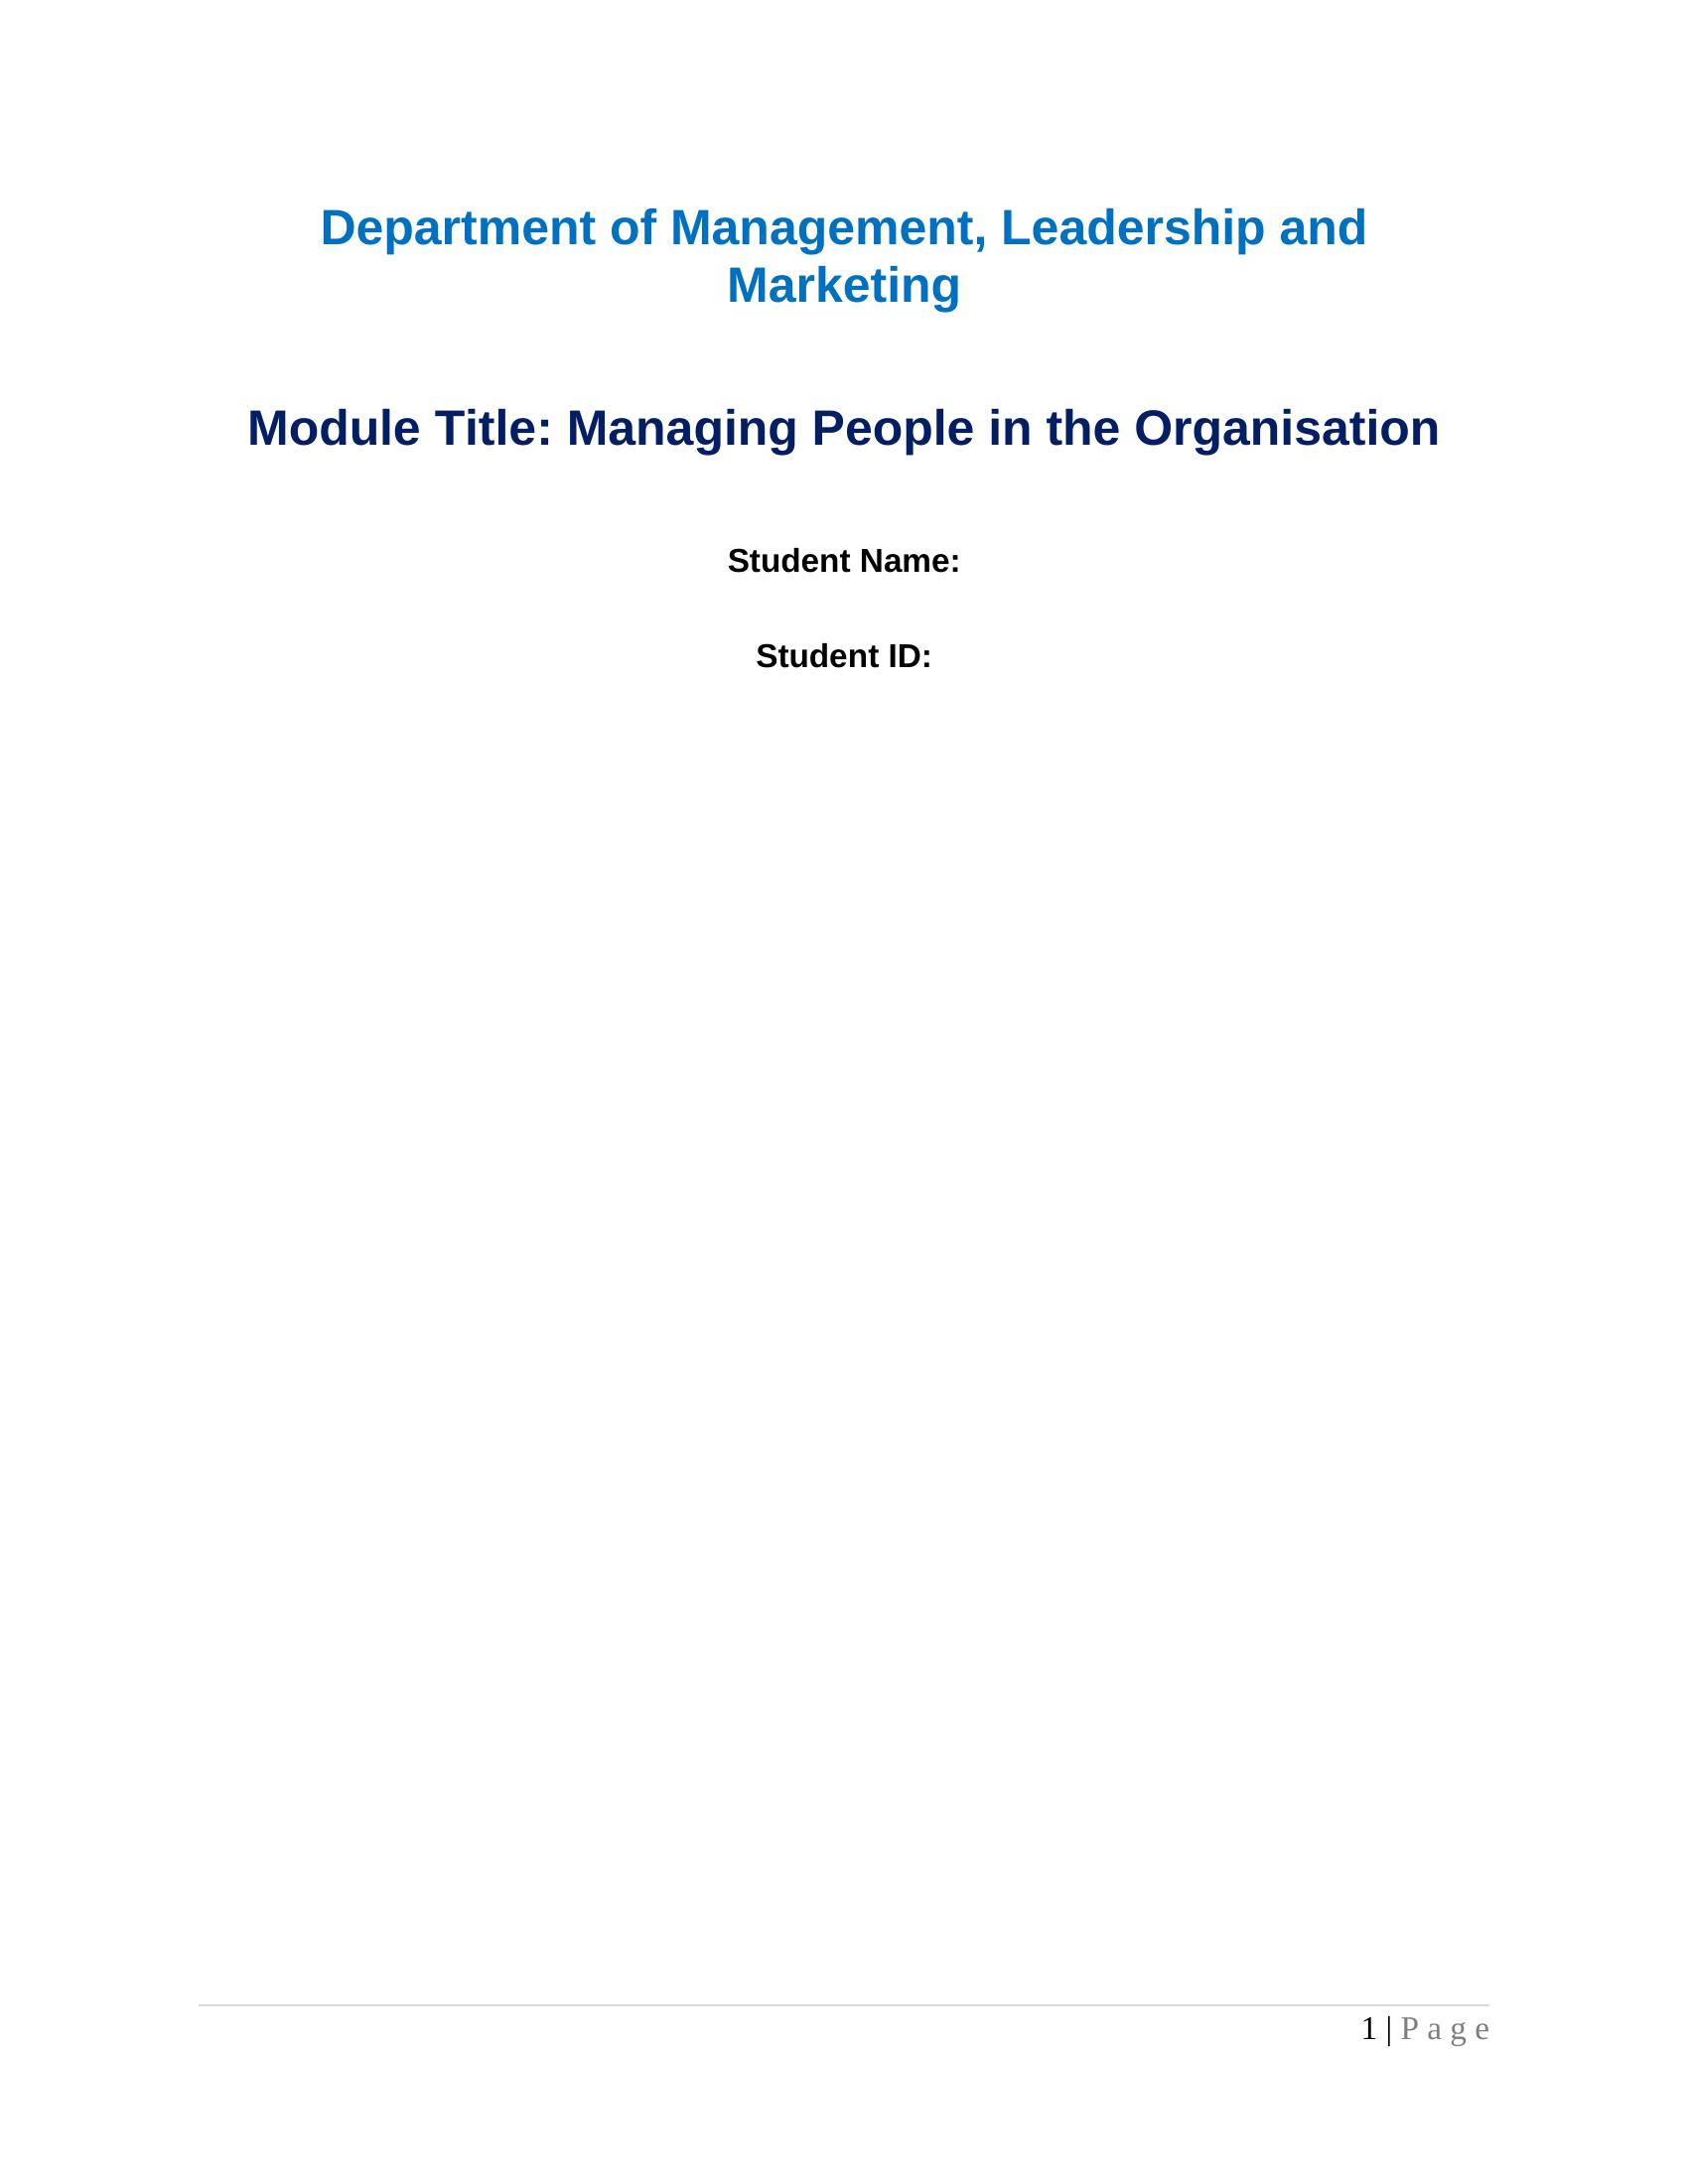 Managing People in the Organisation